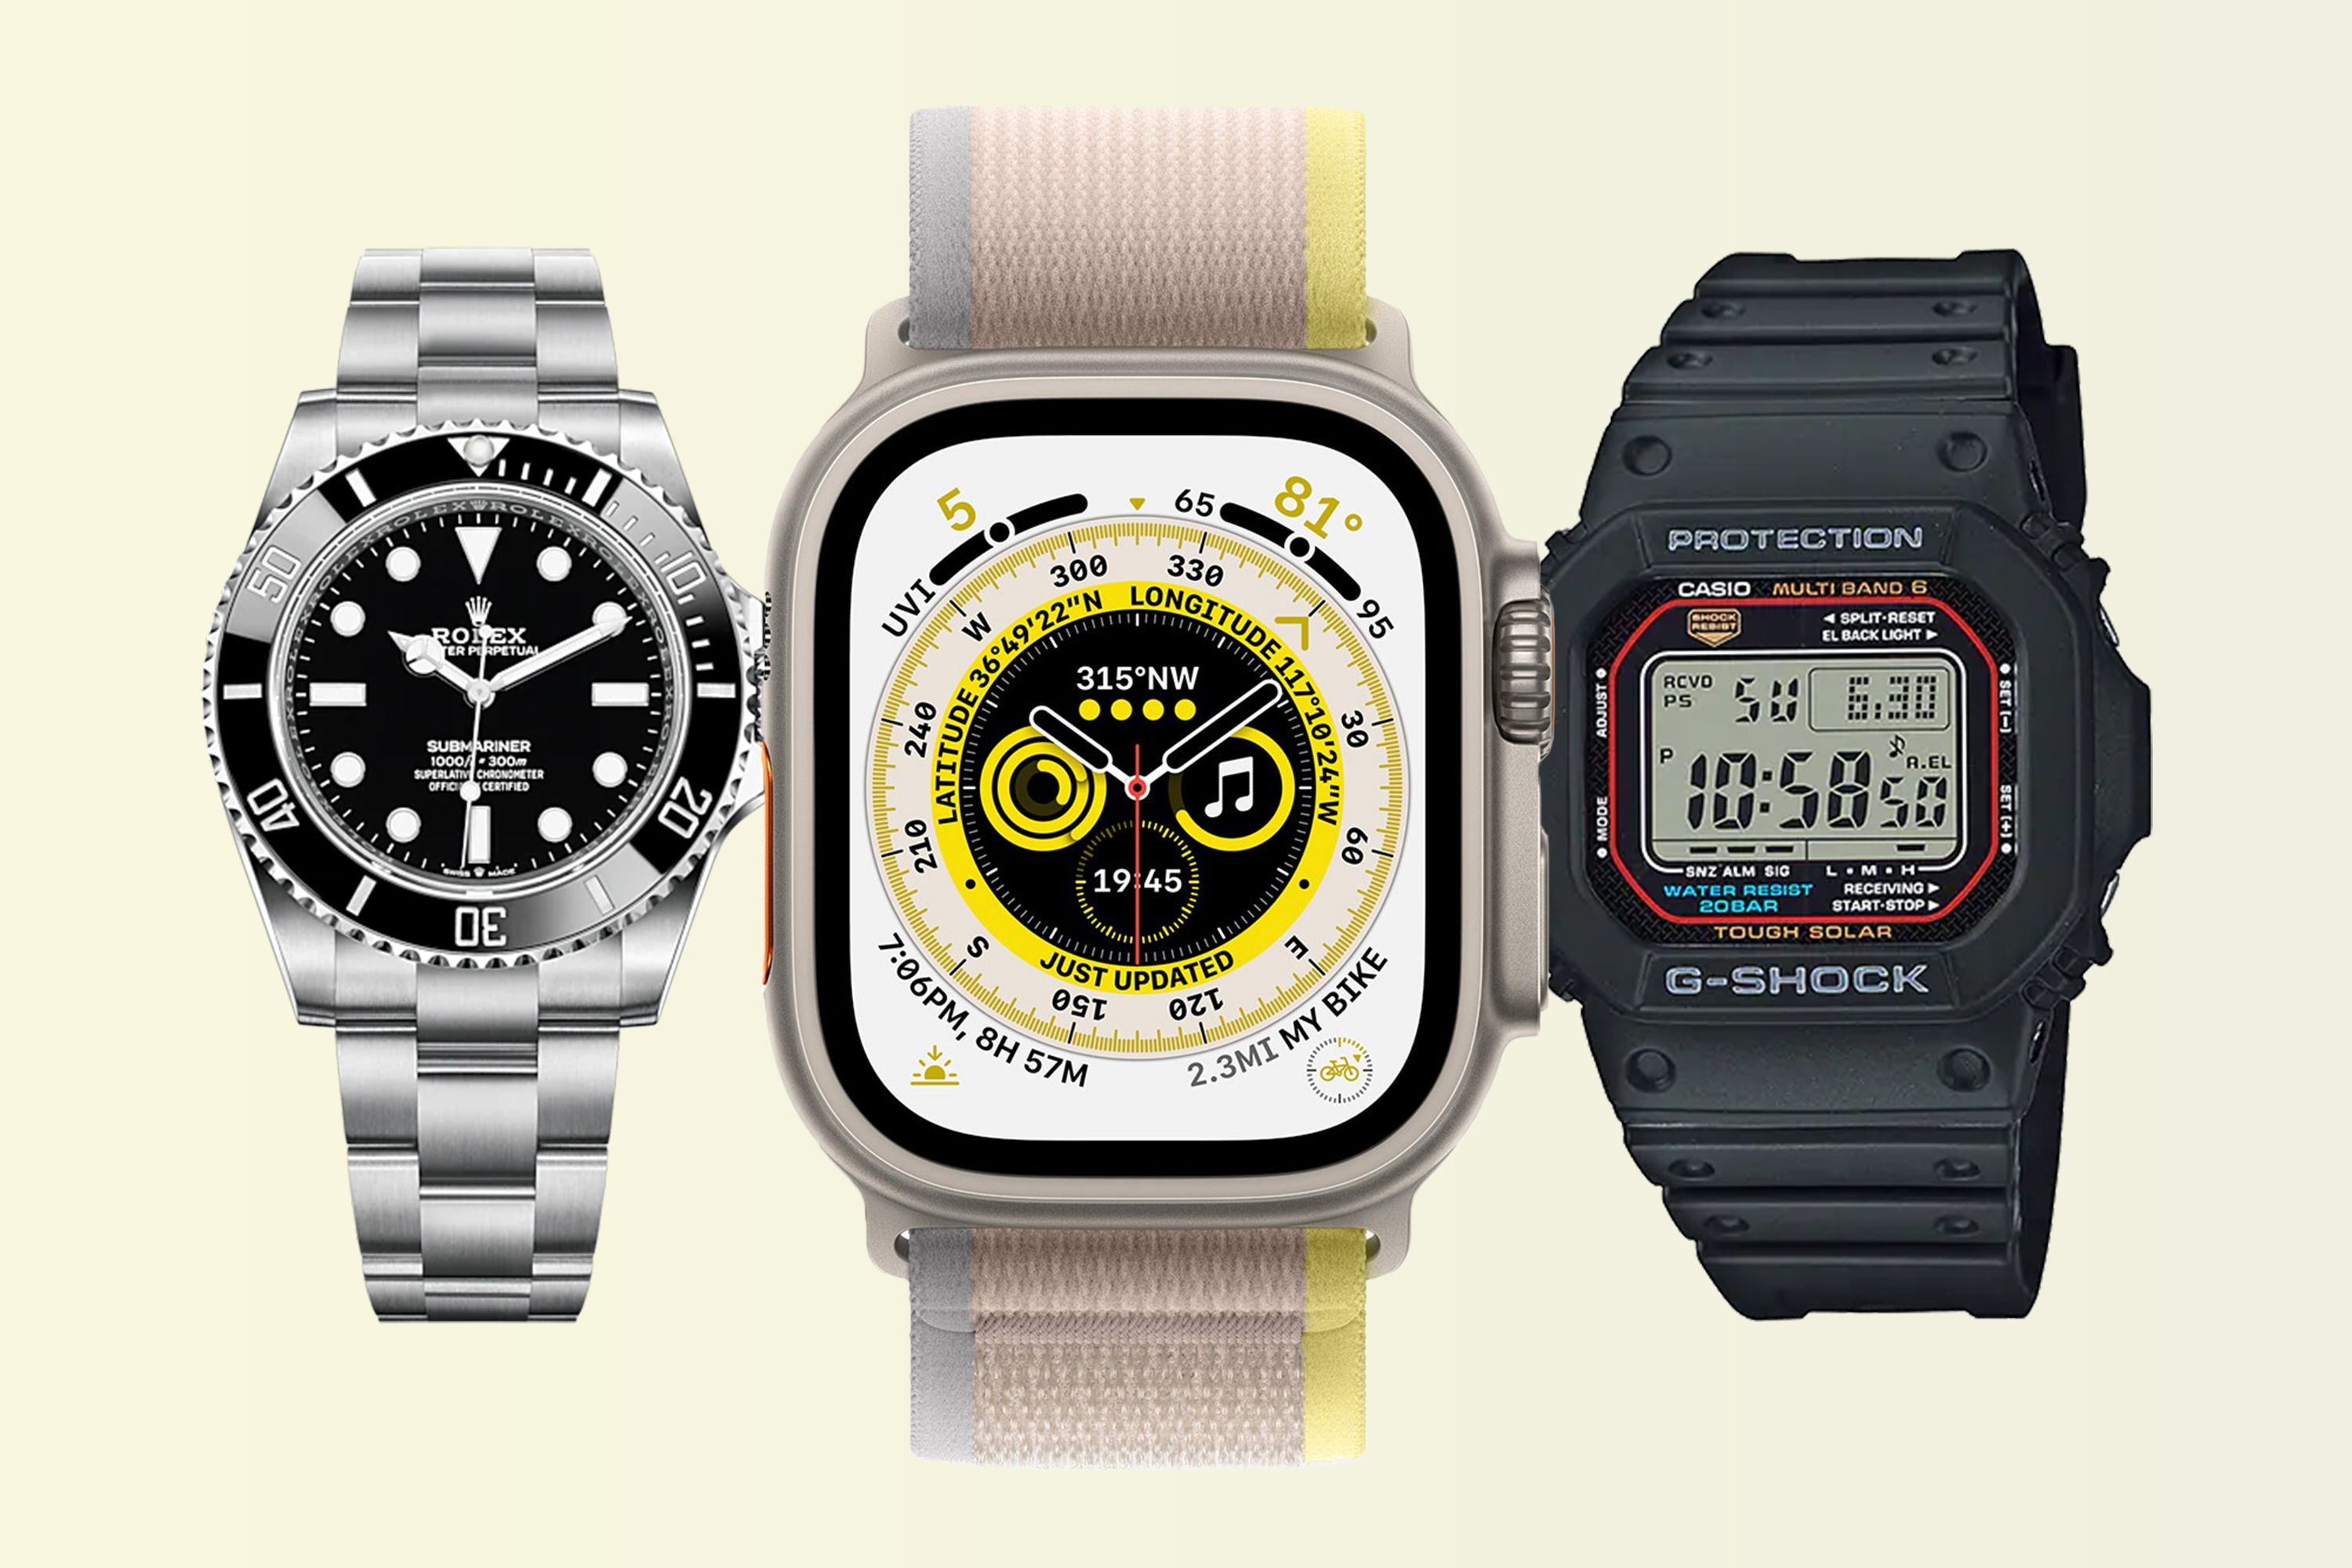 Watch Size vs. Wrist Size - How to choose the right watch size